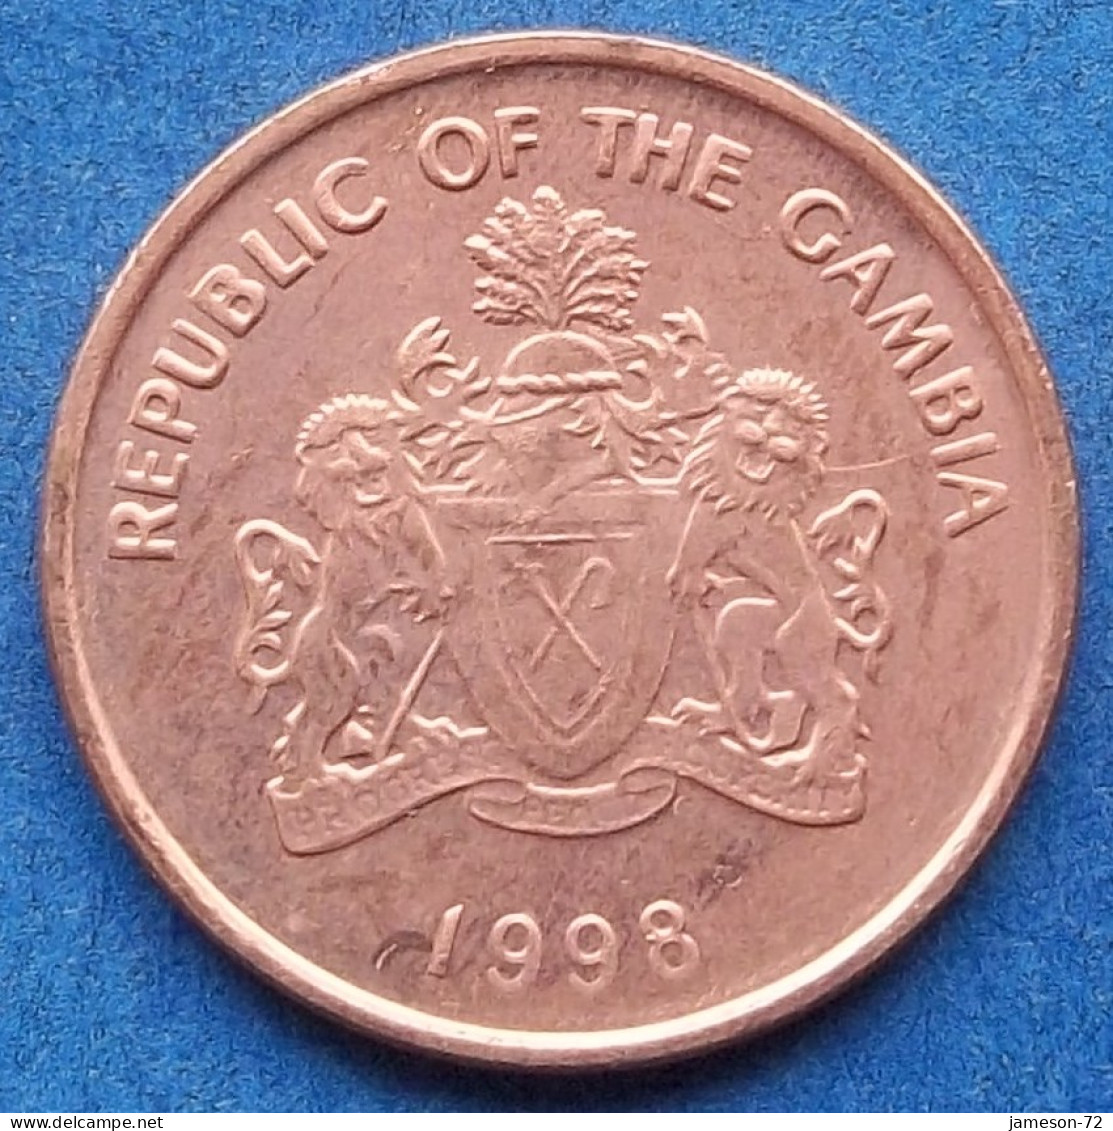 GAMBIA - 1 Butut 1998 "Peanuts" KM# 54 Republic (1965) - Edelweiss Coins - Gambia